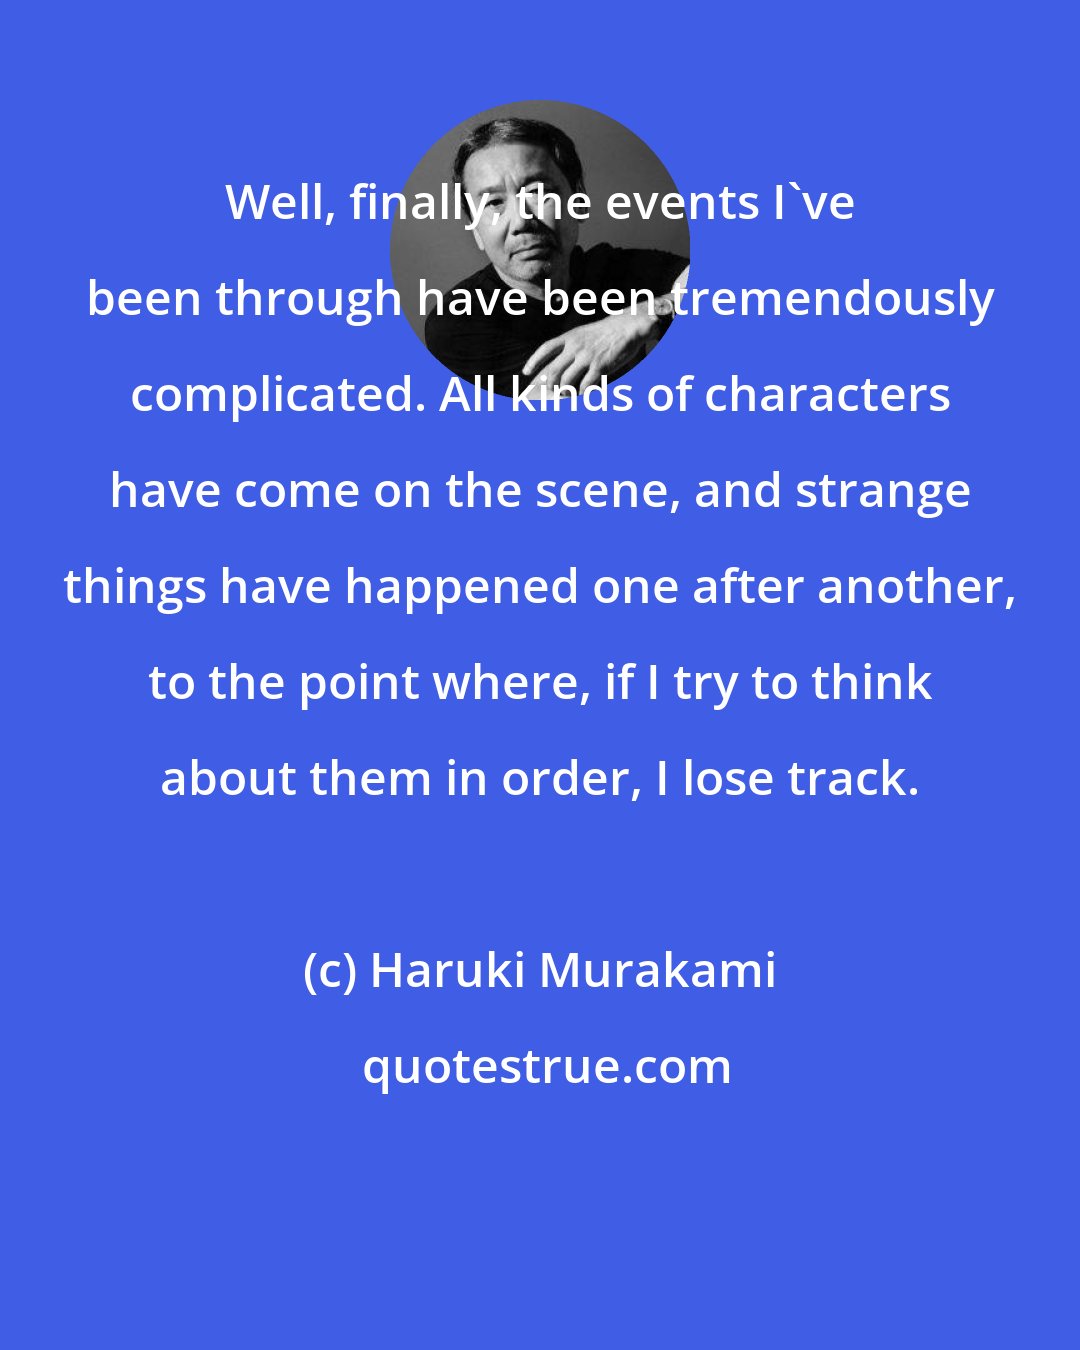 Haruki Murakami: Well, finally, the events I've been through have been tremendously complicated. All kinds of characters have come on the scene, and strange things have happened one after another, to the point where, if I try to think about them in order, I lose track.